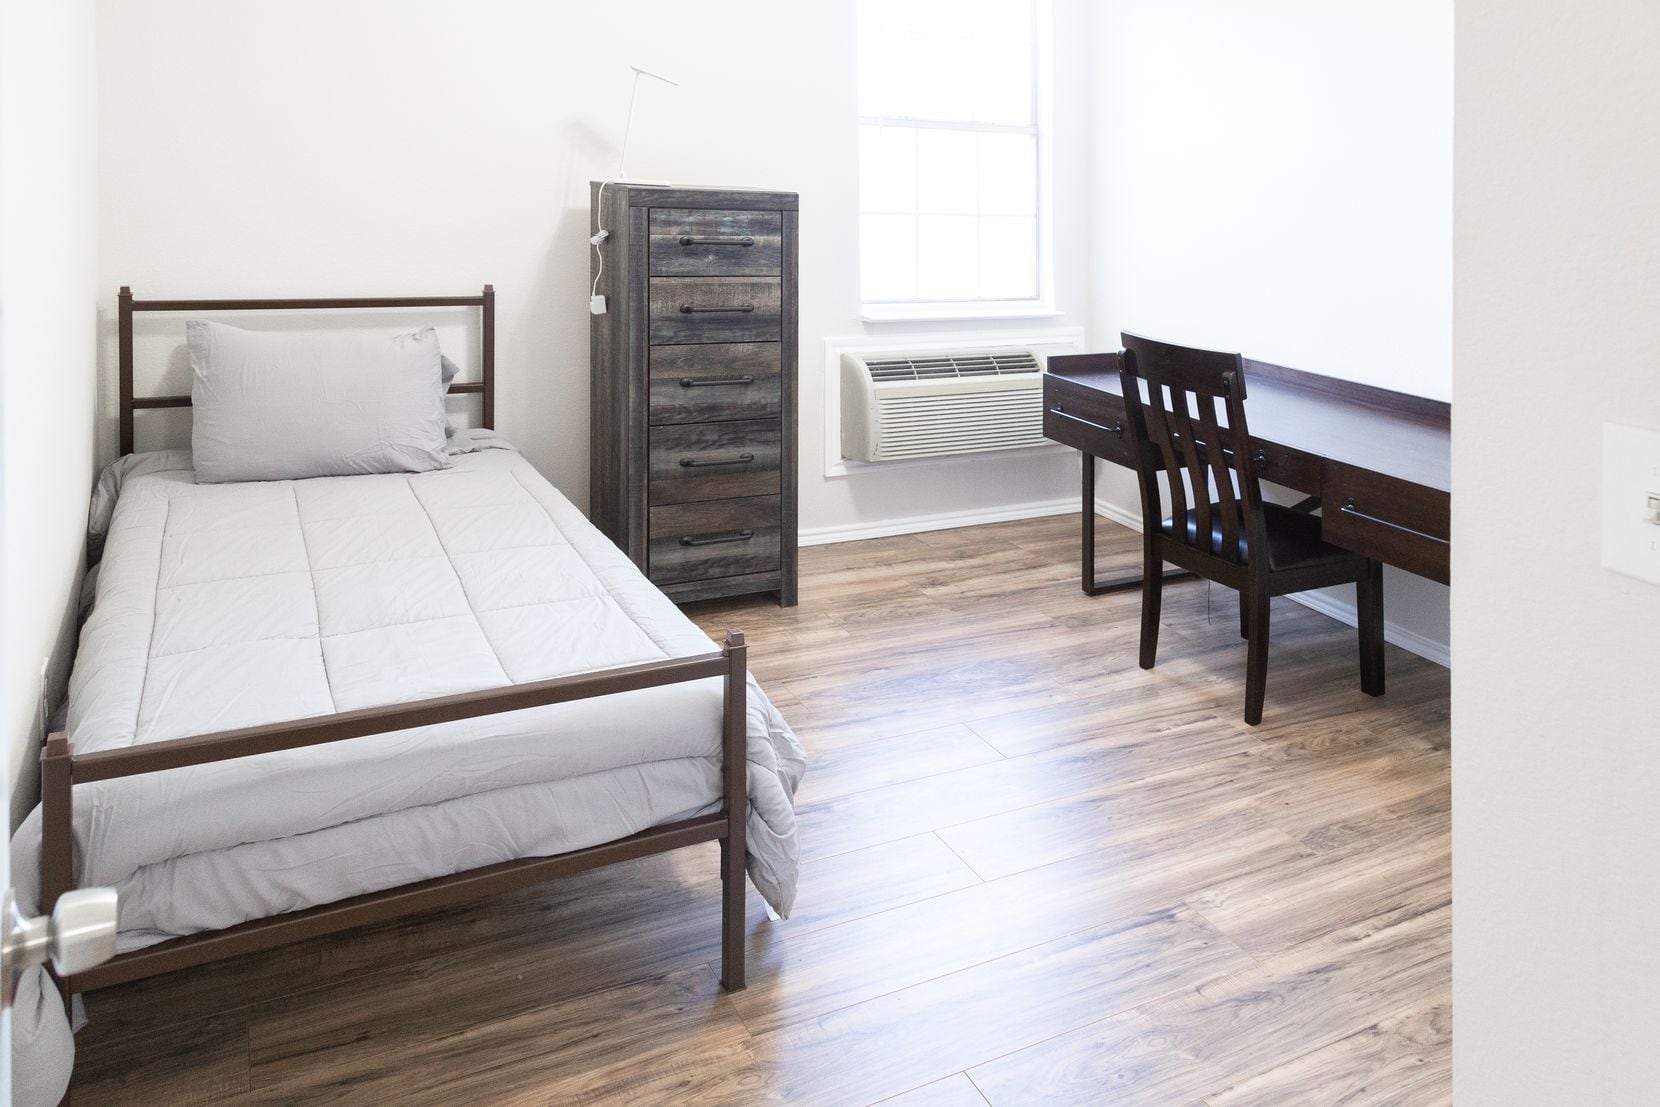 A bedroom furnished with a bed, desk, chair, and dresser at Tillman House, a sober living...